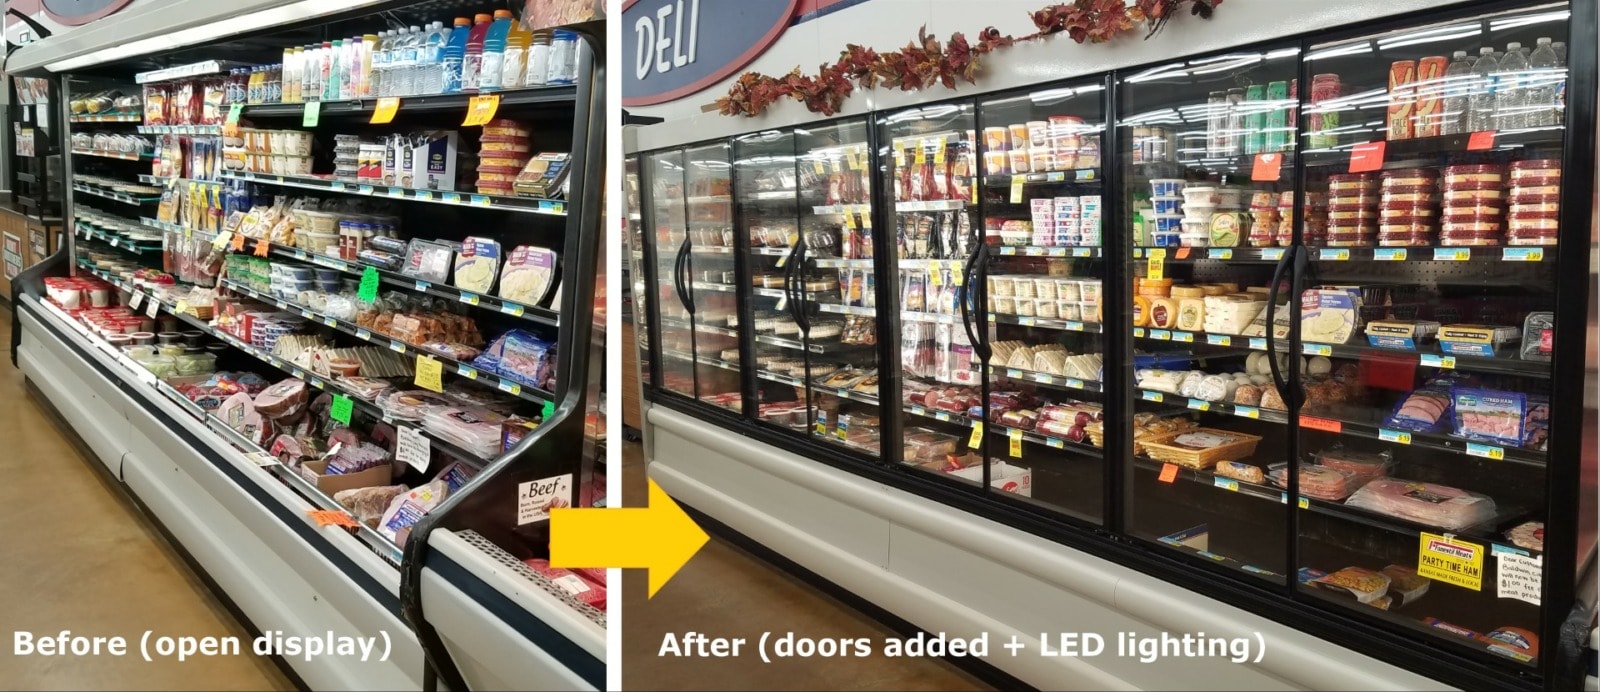 A split photo shows a grocery store display case on the left that is open and one on the right that has doors on the cases. Text on the bottom reads "Before (open display)" and "After (doors added + LED lighting)"